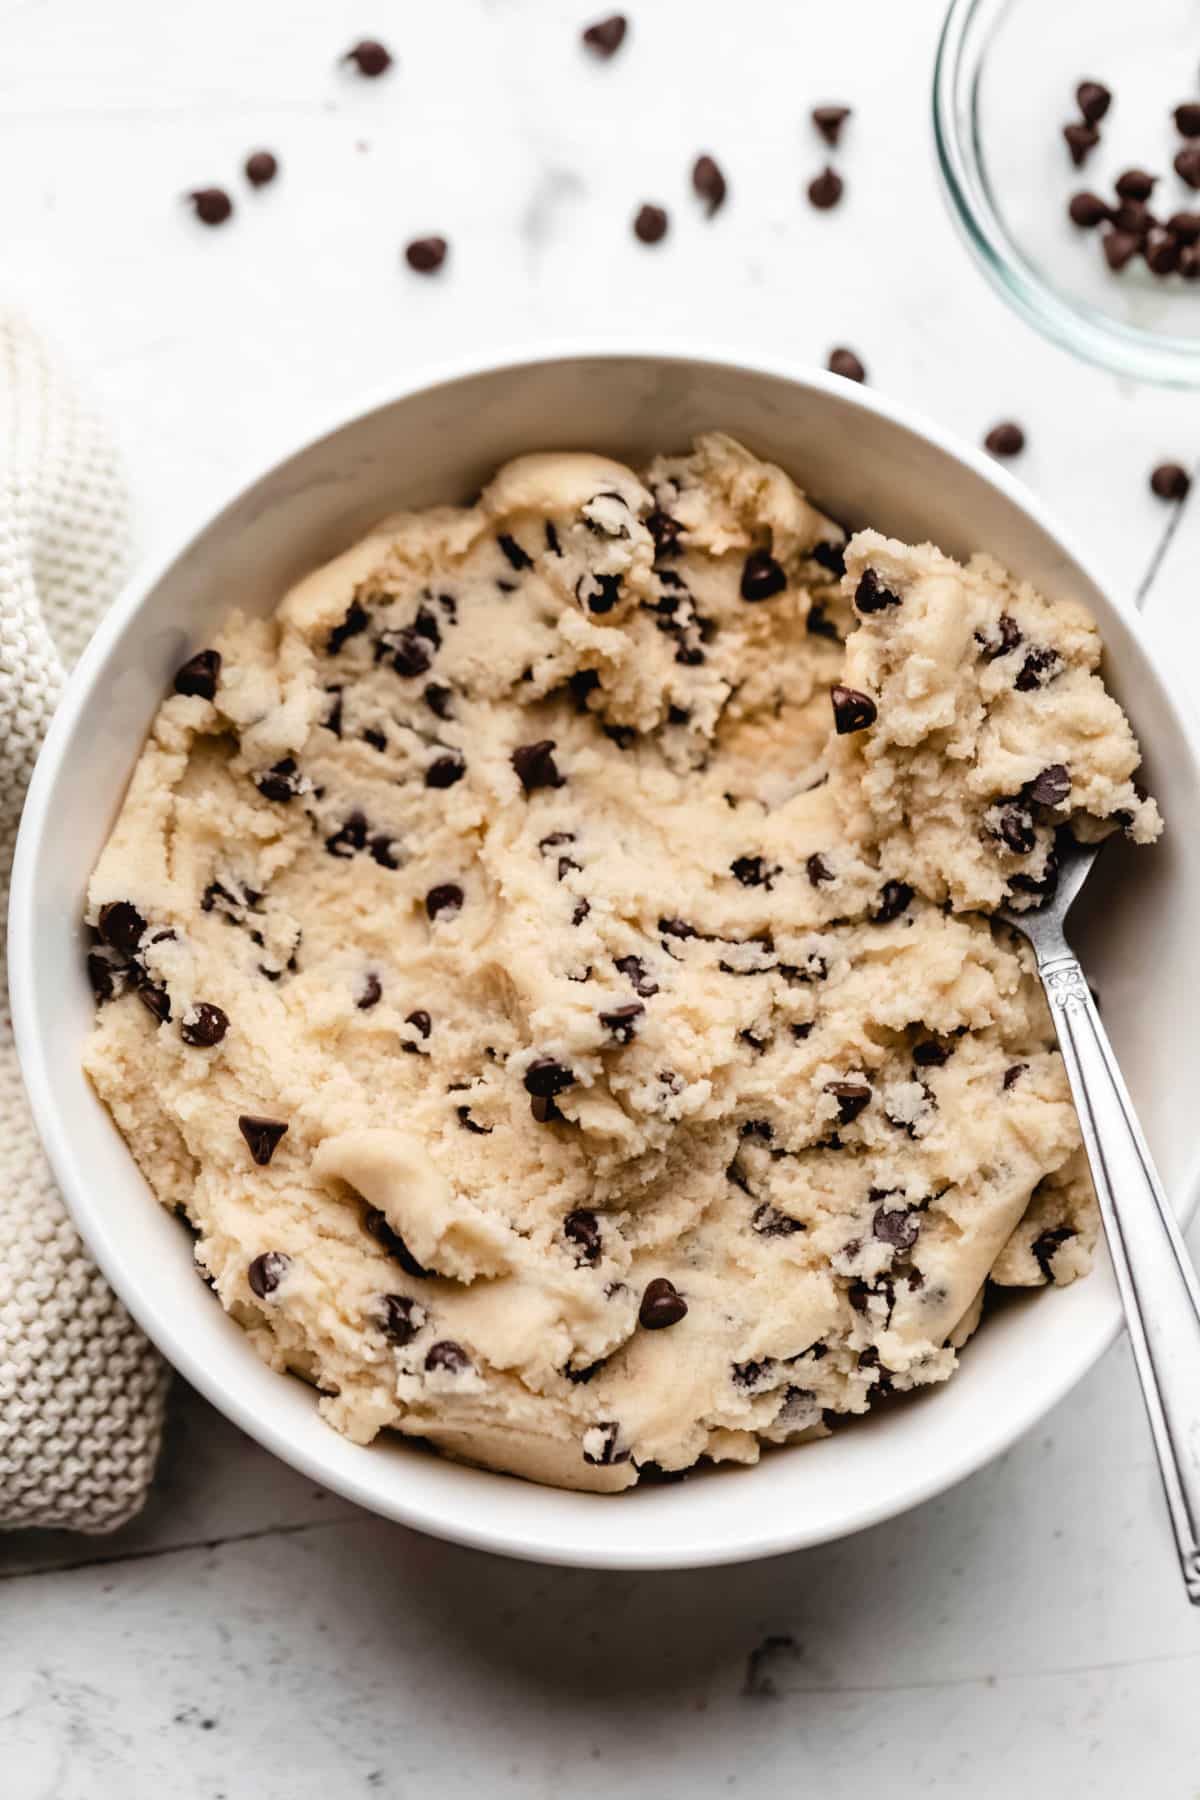 https://www.ihearteating.com/wp-content/uploads/2023/05/edible-cookie-dough-4-1200.jpg